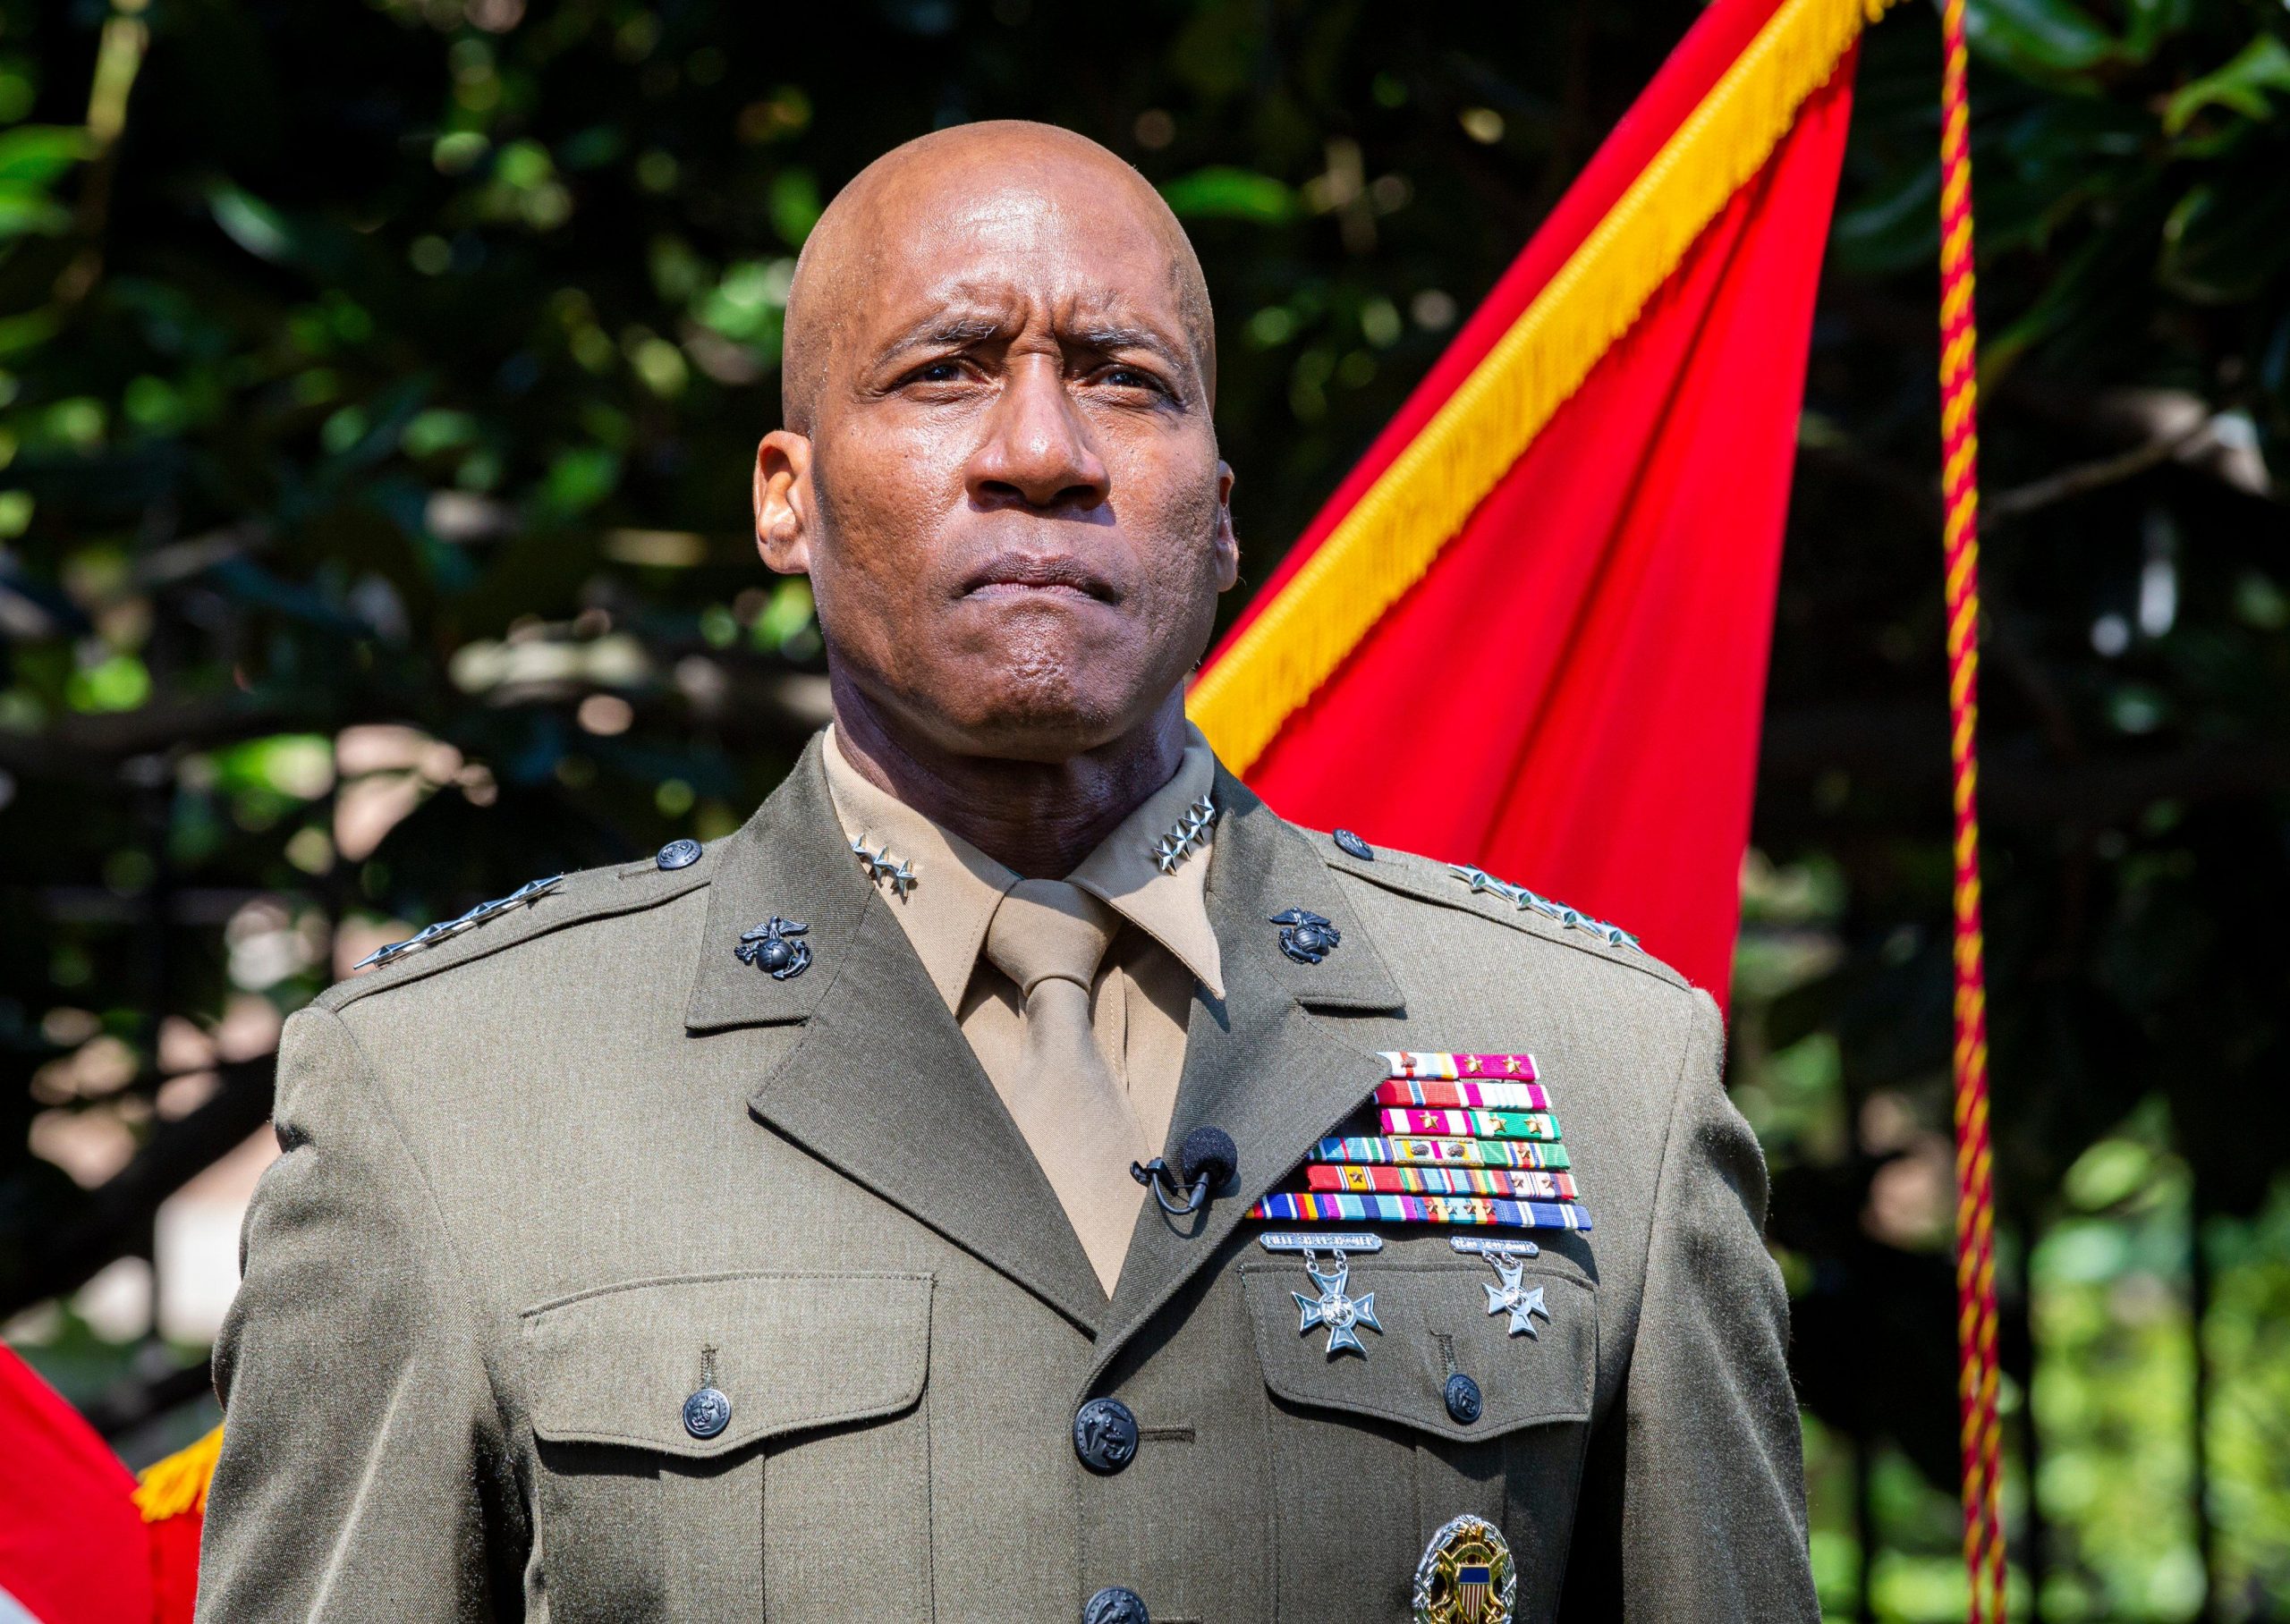 Michael E. Langley: All about the first Black 4-star US Marine general